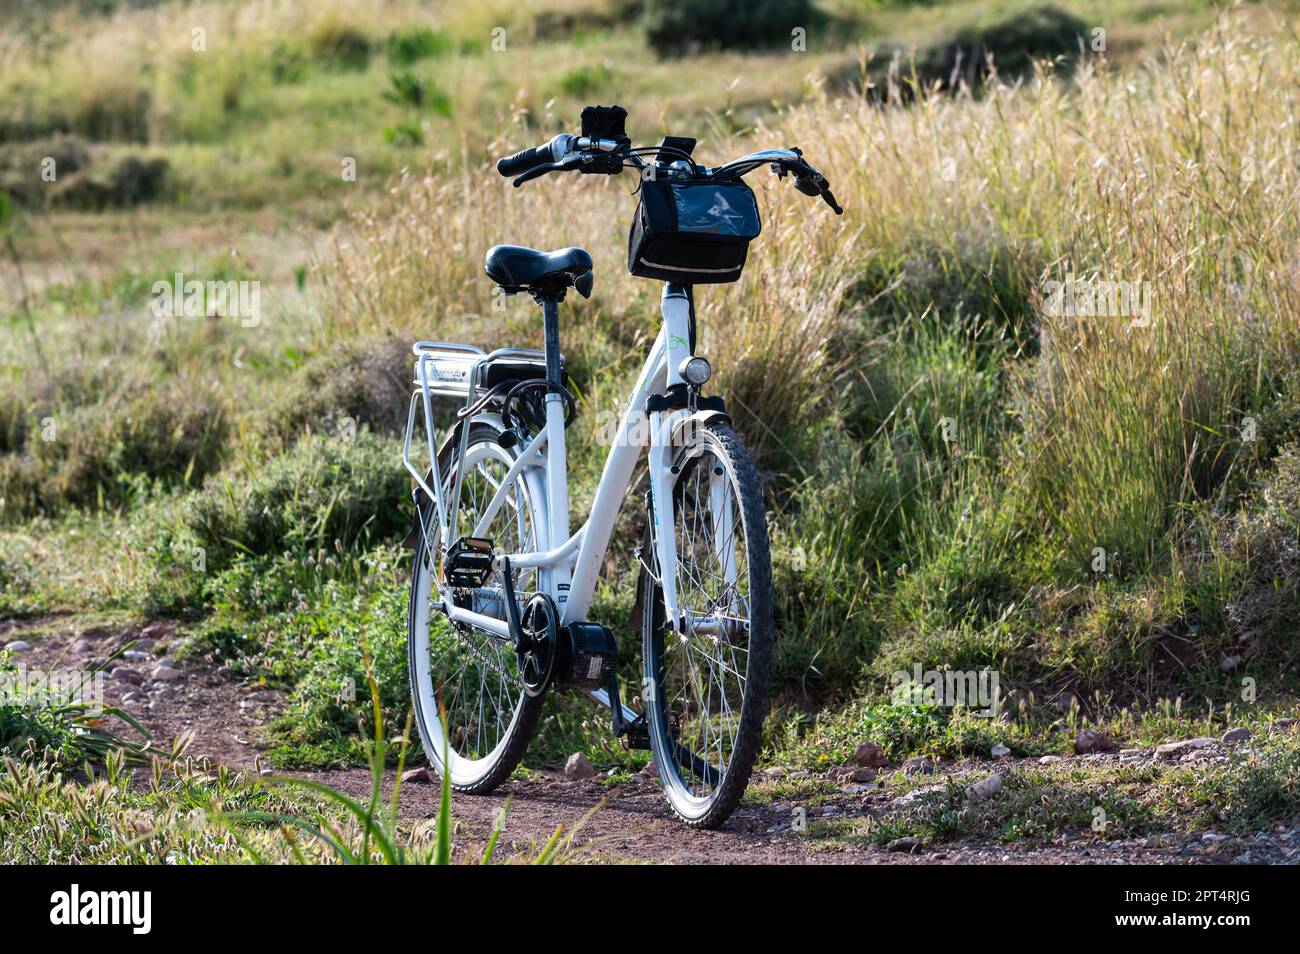 Peyia, Cyprus, March 27, 2023 - Electric bicycle standing on a rough outdoor location Stock Photo